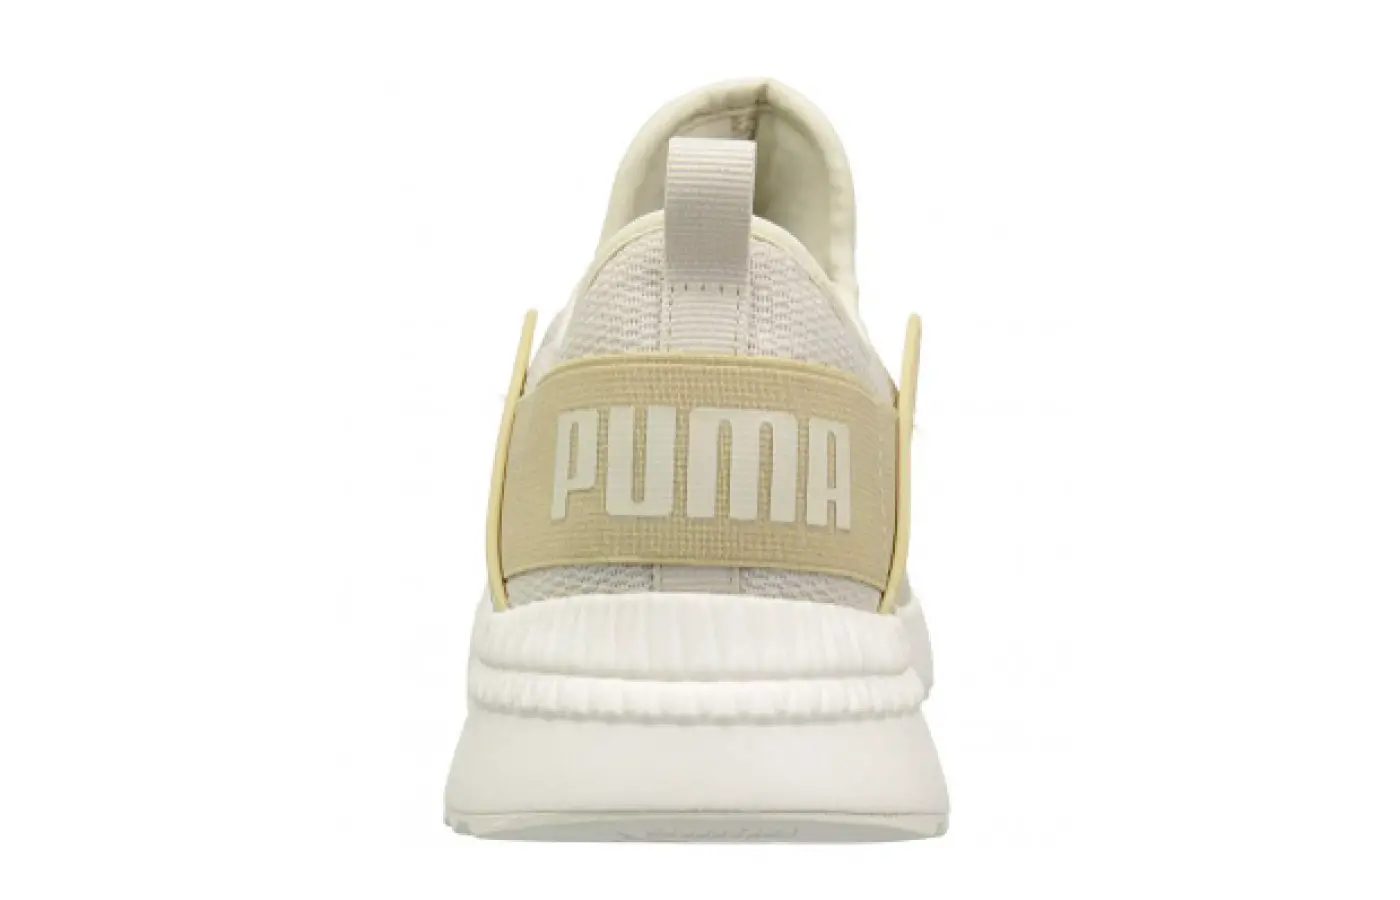 With it's easy slip-on tab, the Puma Pacer Next Cage is fast to put on.